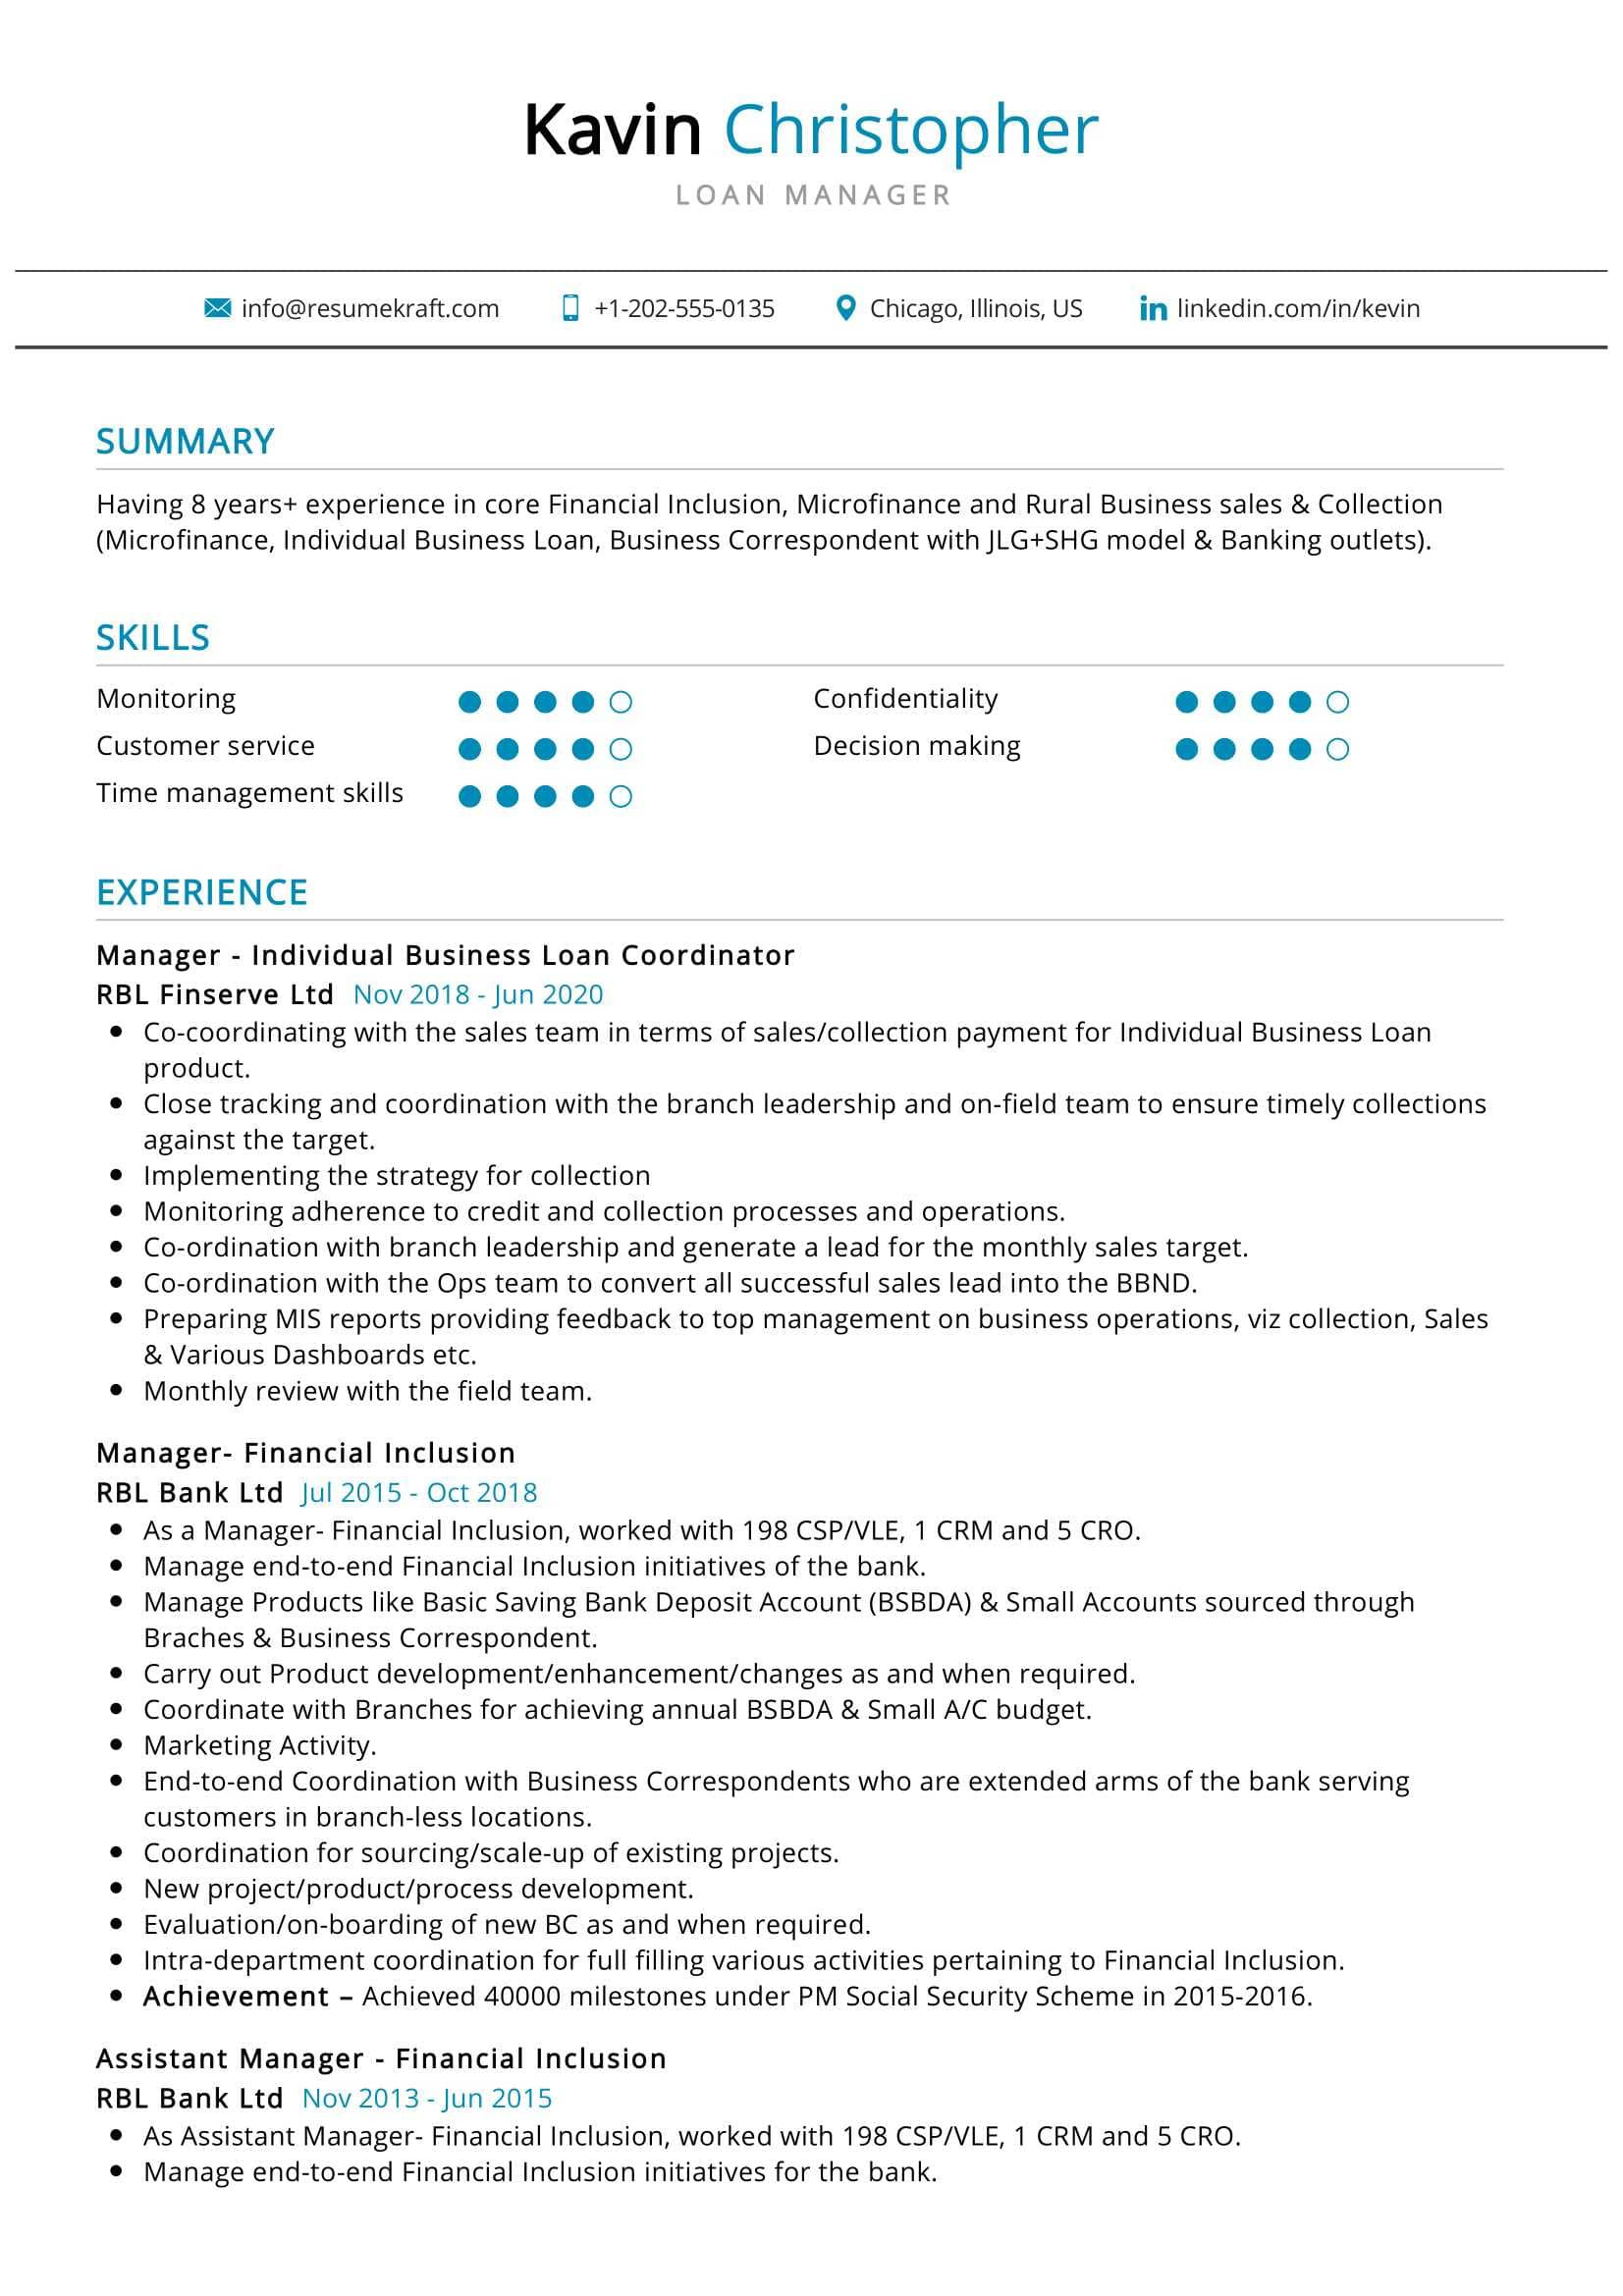 Resume Samples for Credit Manager India Loan Manager Resume Sample 2022 Writing Tips – Resumekraft